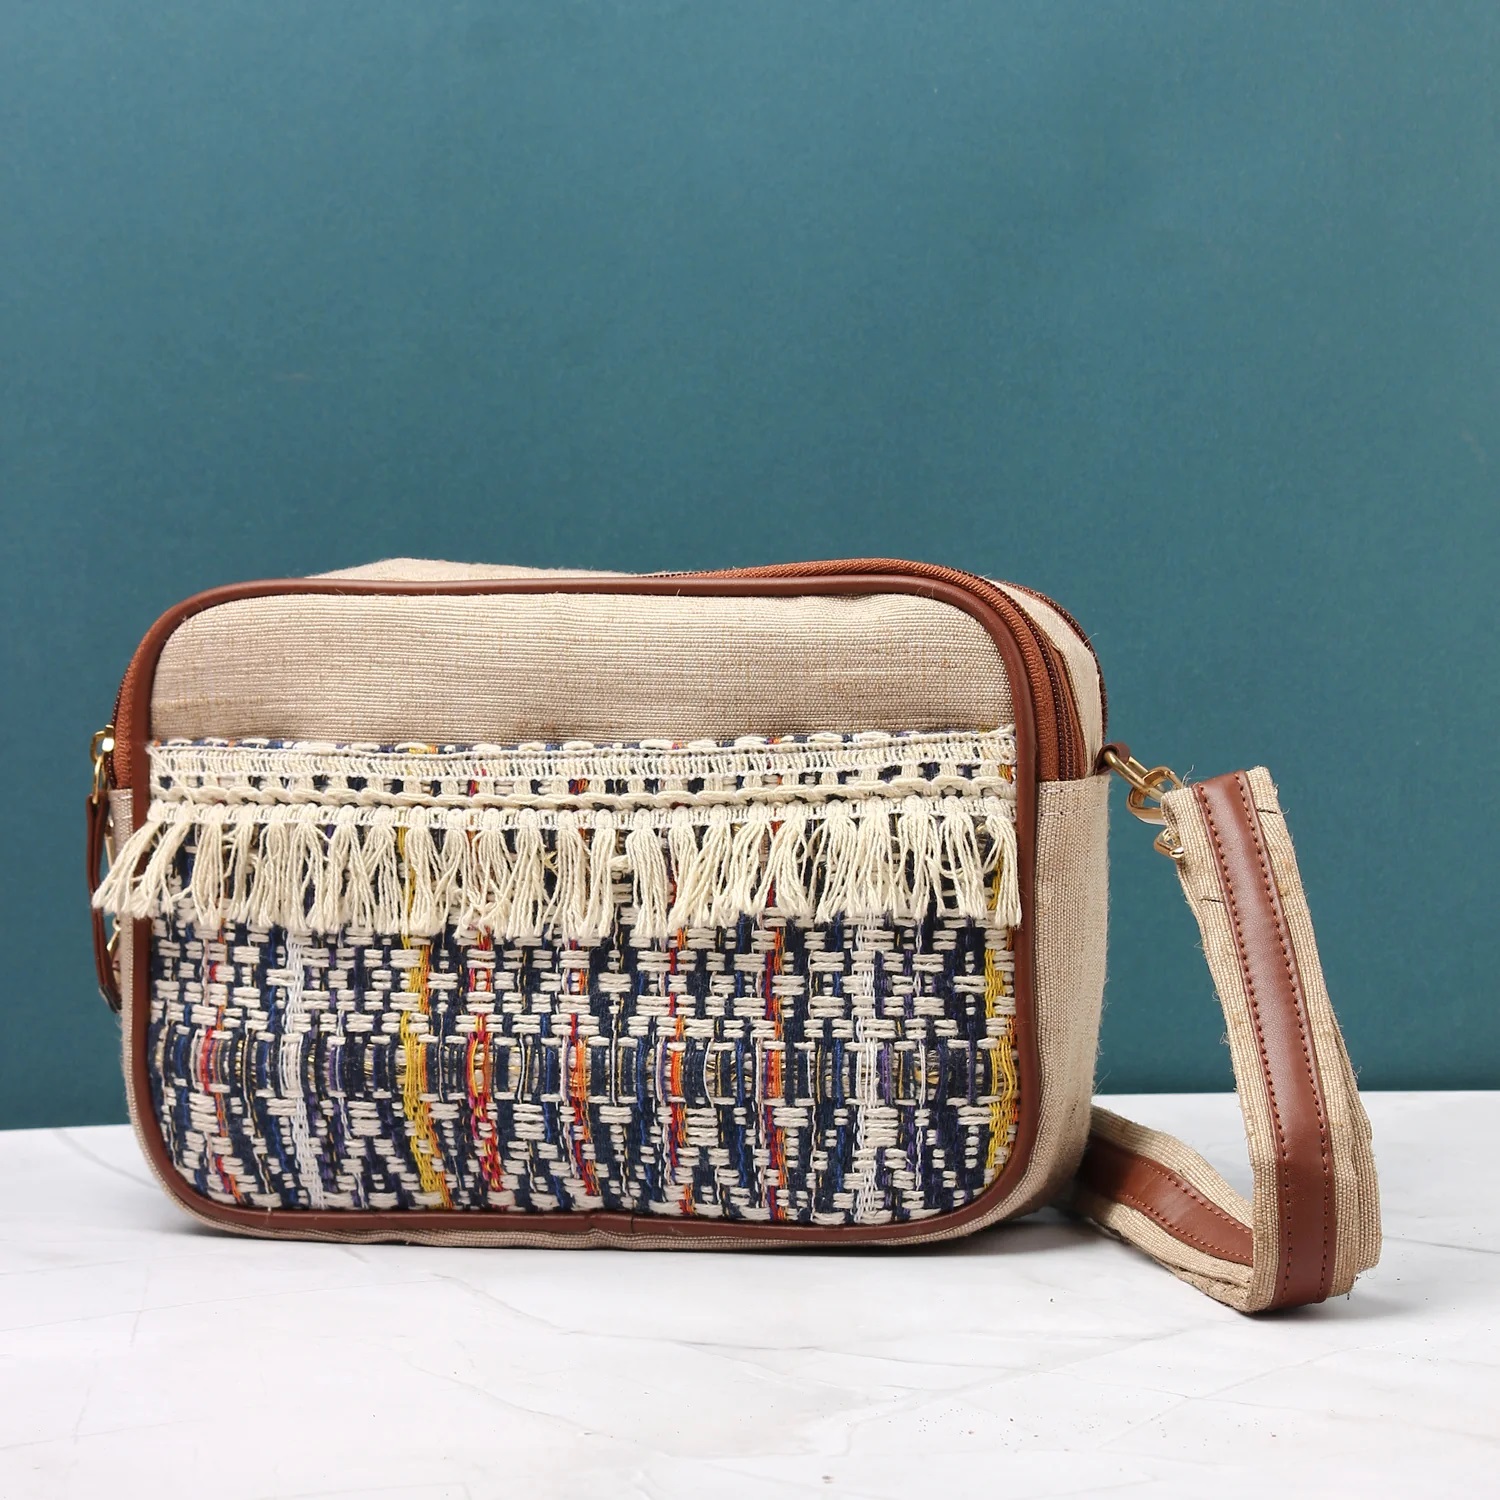 NESH | GRITTY LADY | JUTE COTTON SLING BAG, Latest Collection of Sling Bags